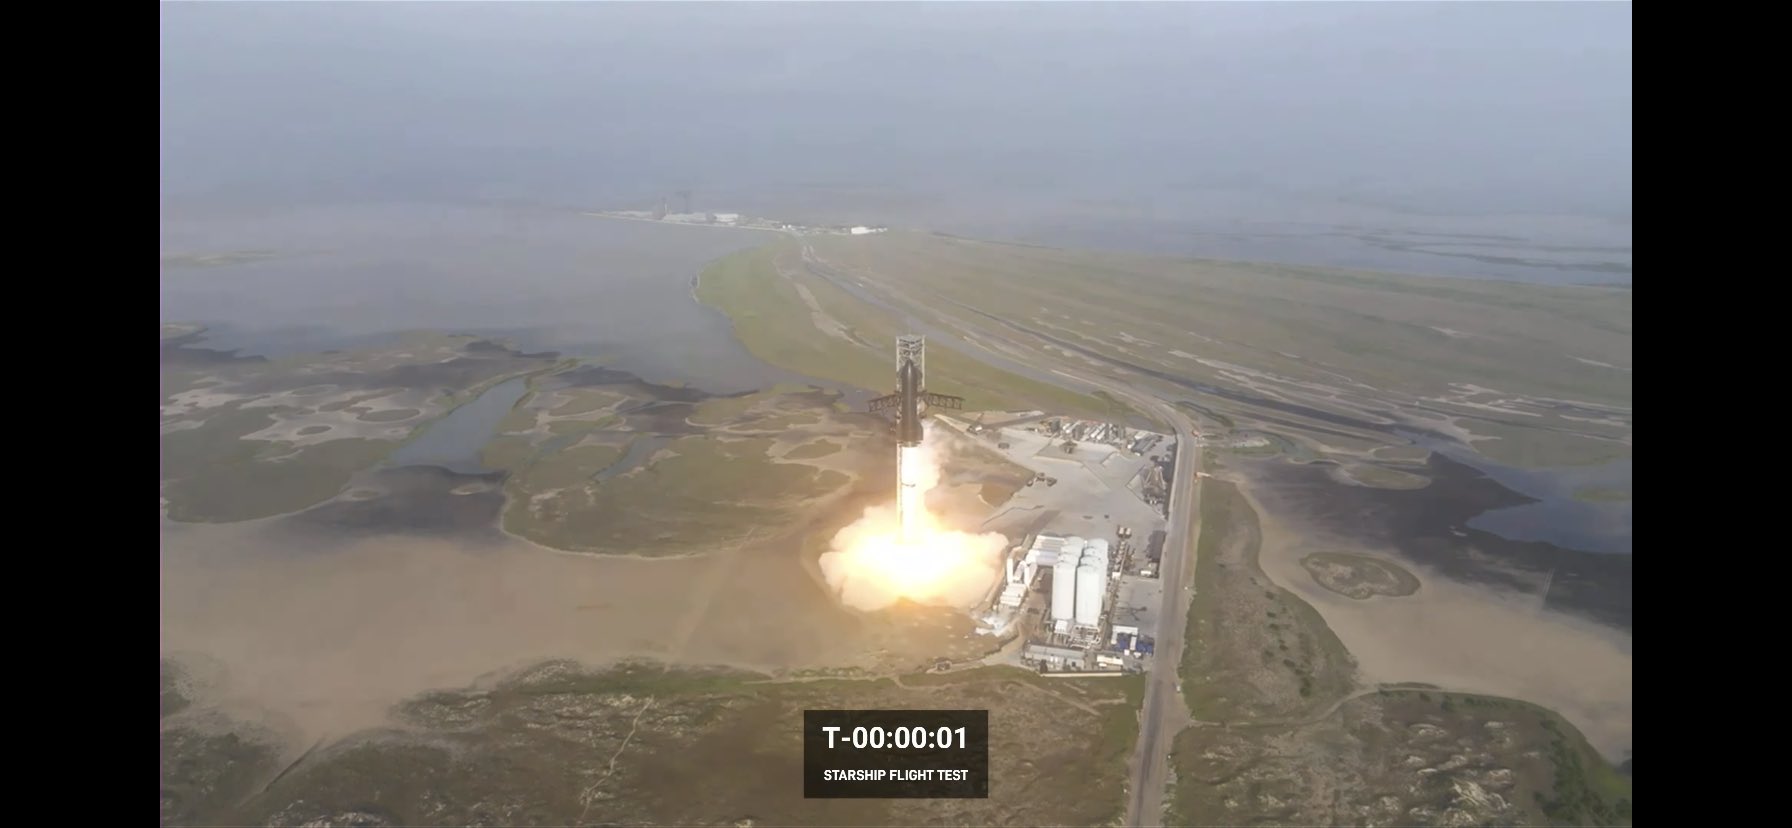 Congrats  @SpaceX  team on an exciting test launch of Starship